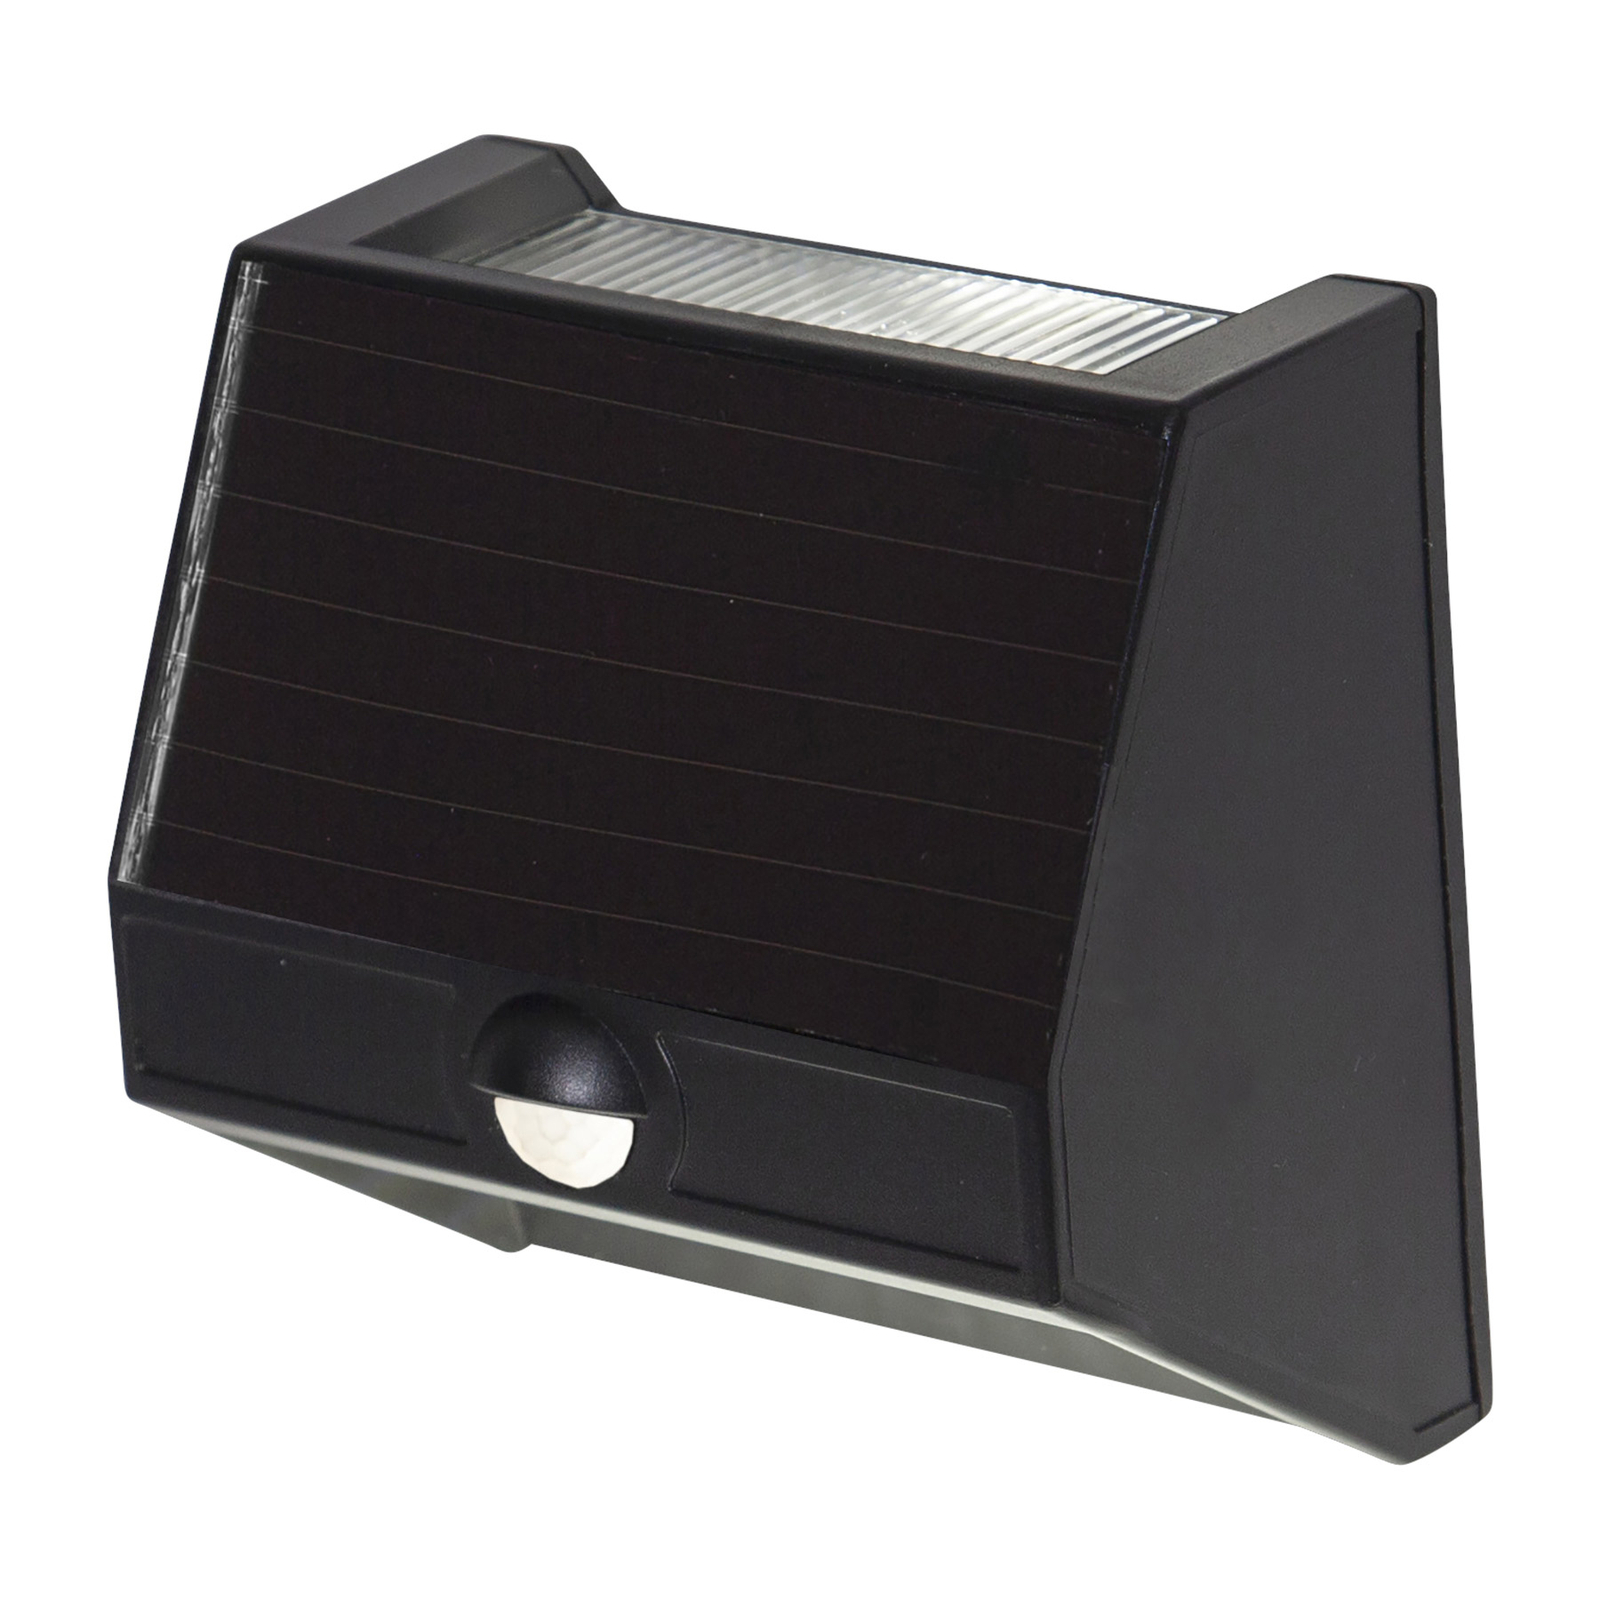 Wally LED solar wall light with up and downlight